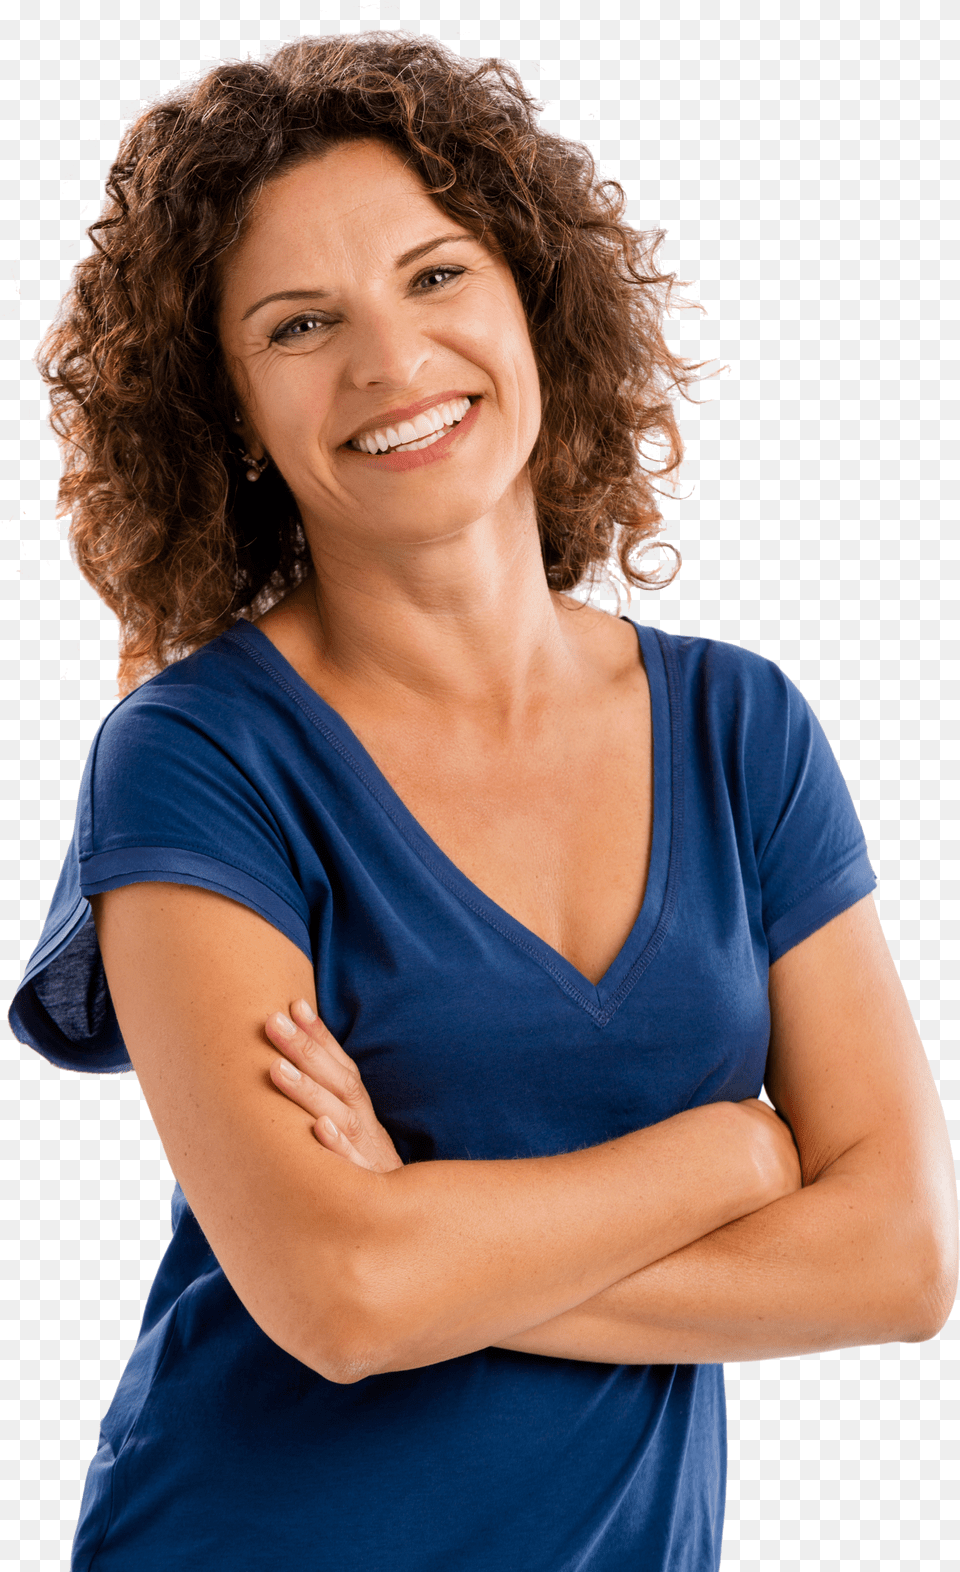 Woman Smiling Png